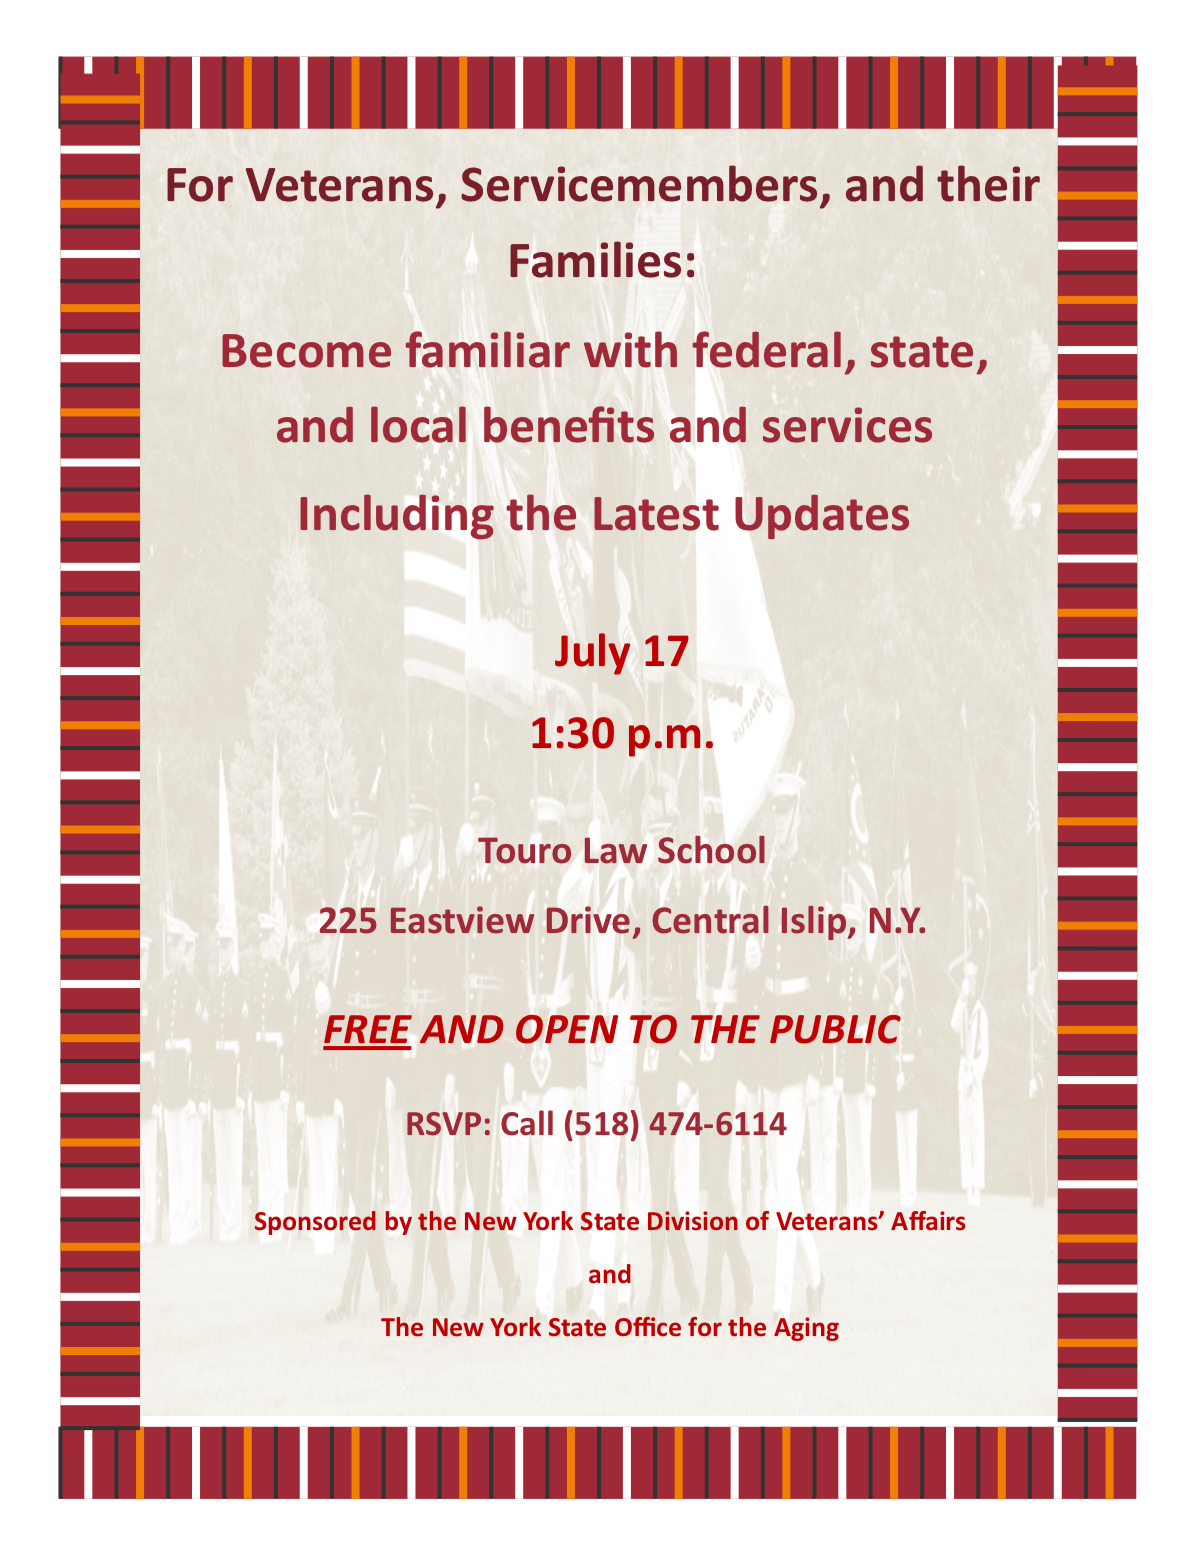 Forum for Veterans, Servicemembers and their families at Touro Law School – July 17, 2018